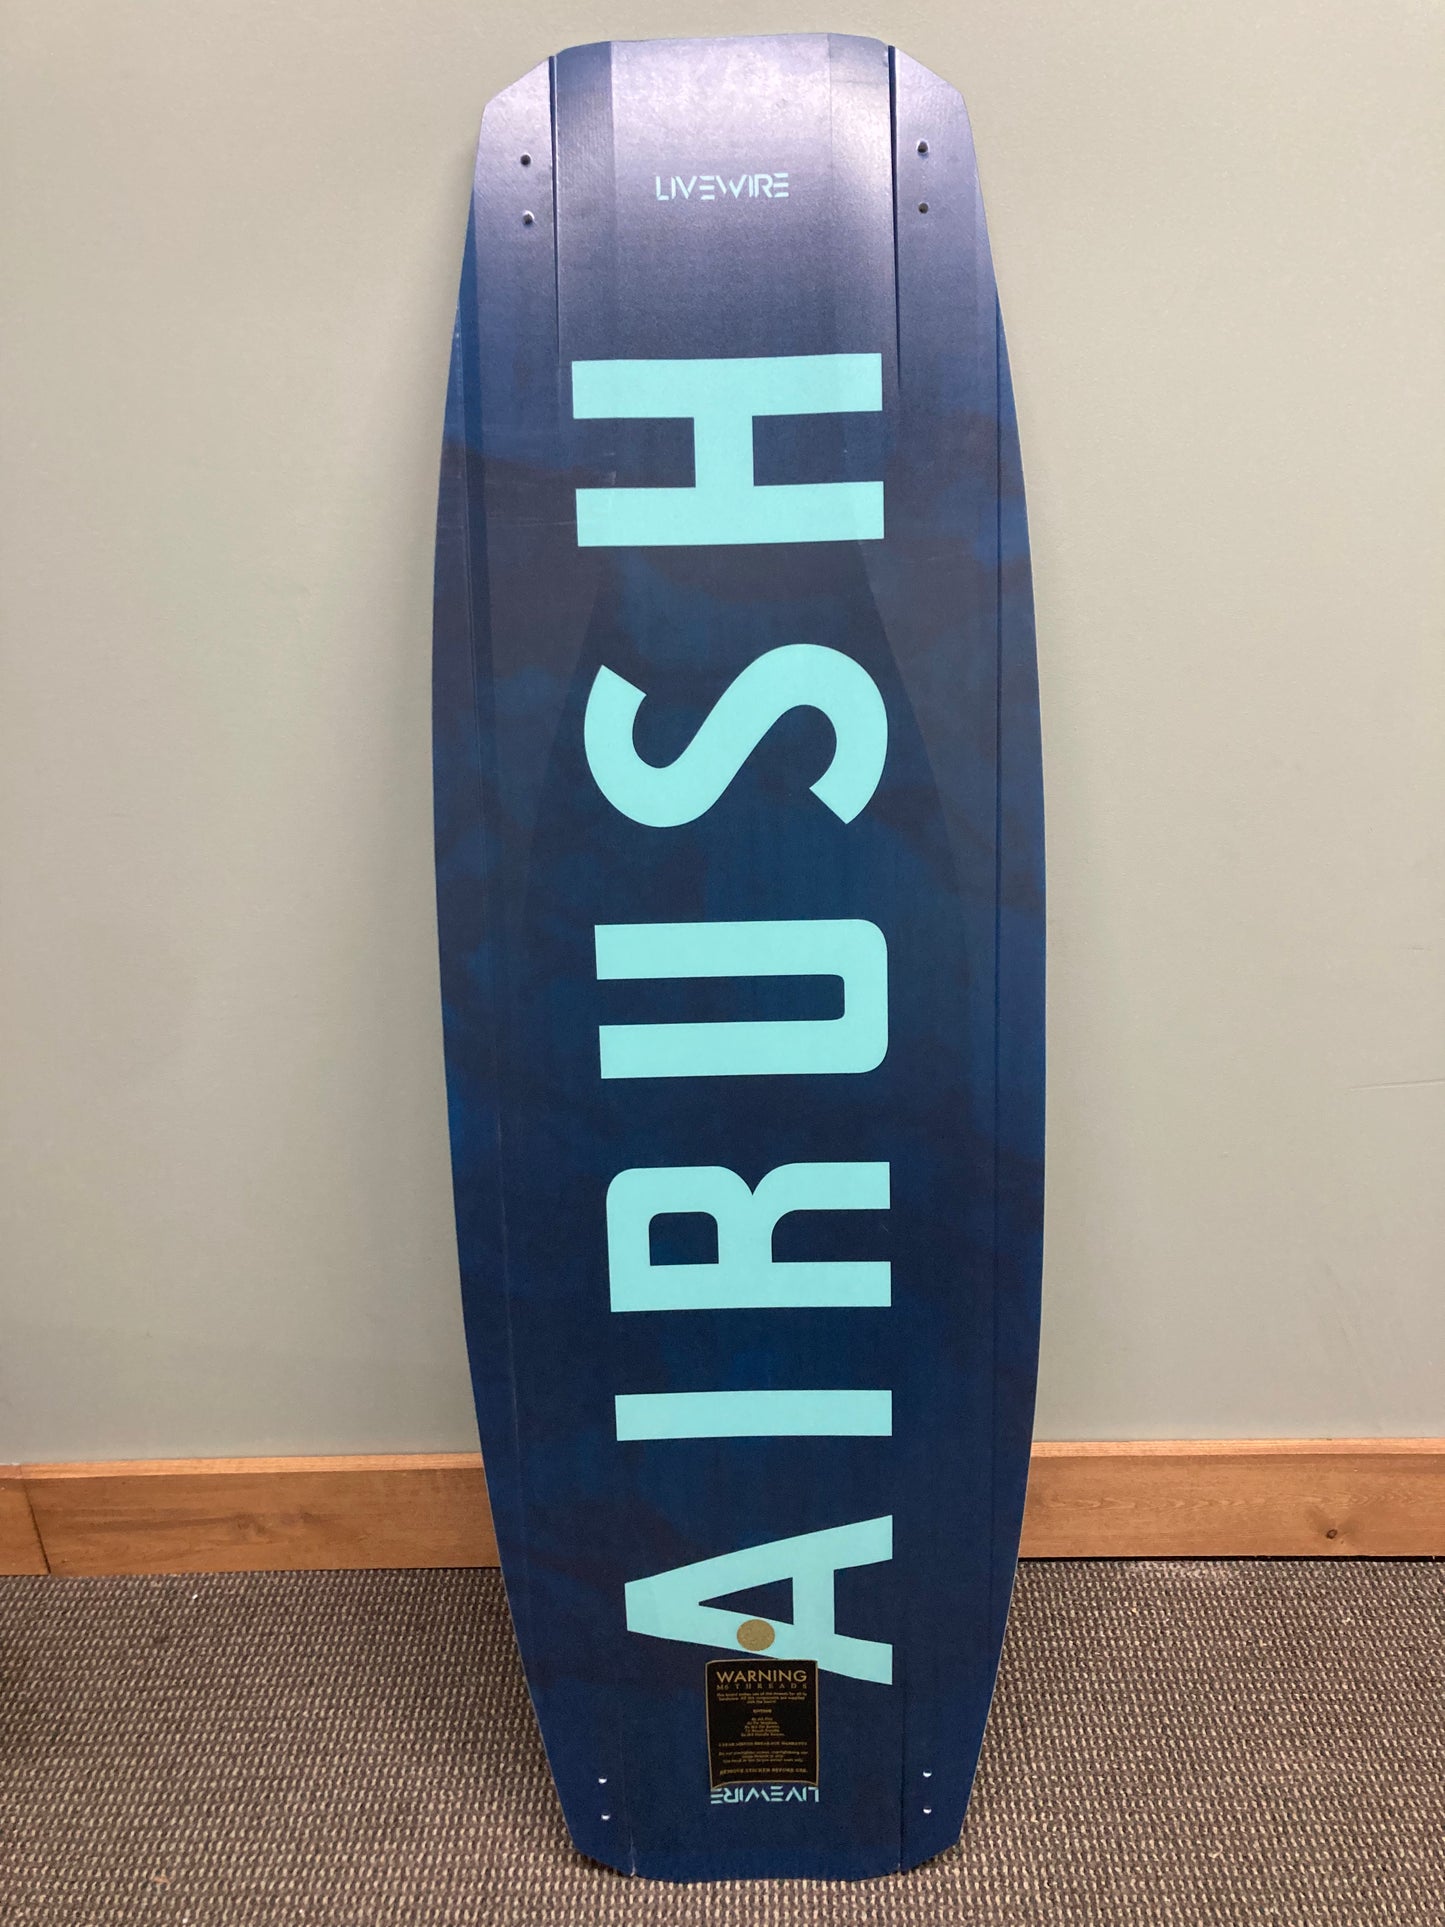 AIRUSH LIVEWIRE TEAM V7 142 x 43 BOARD AND FINS ONLY